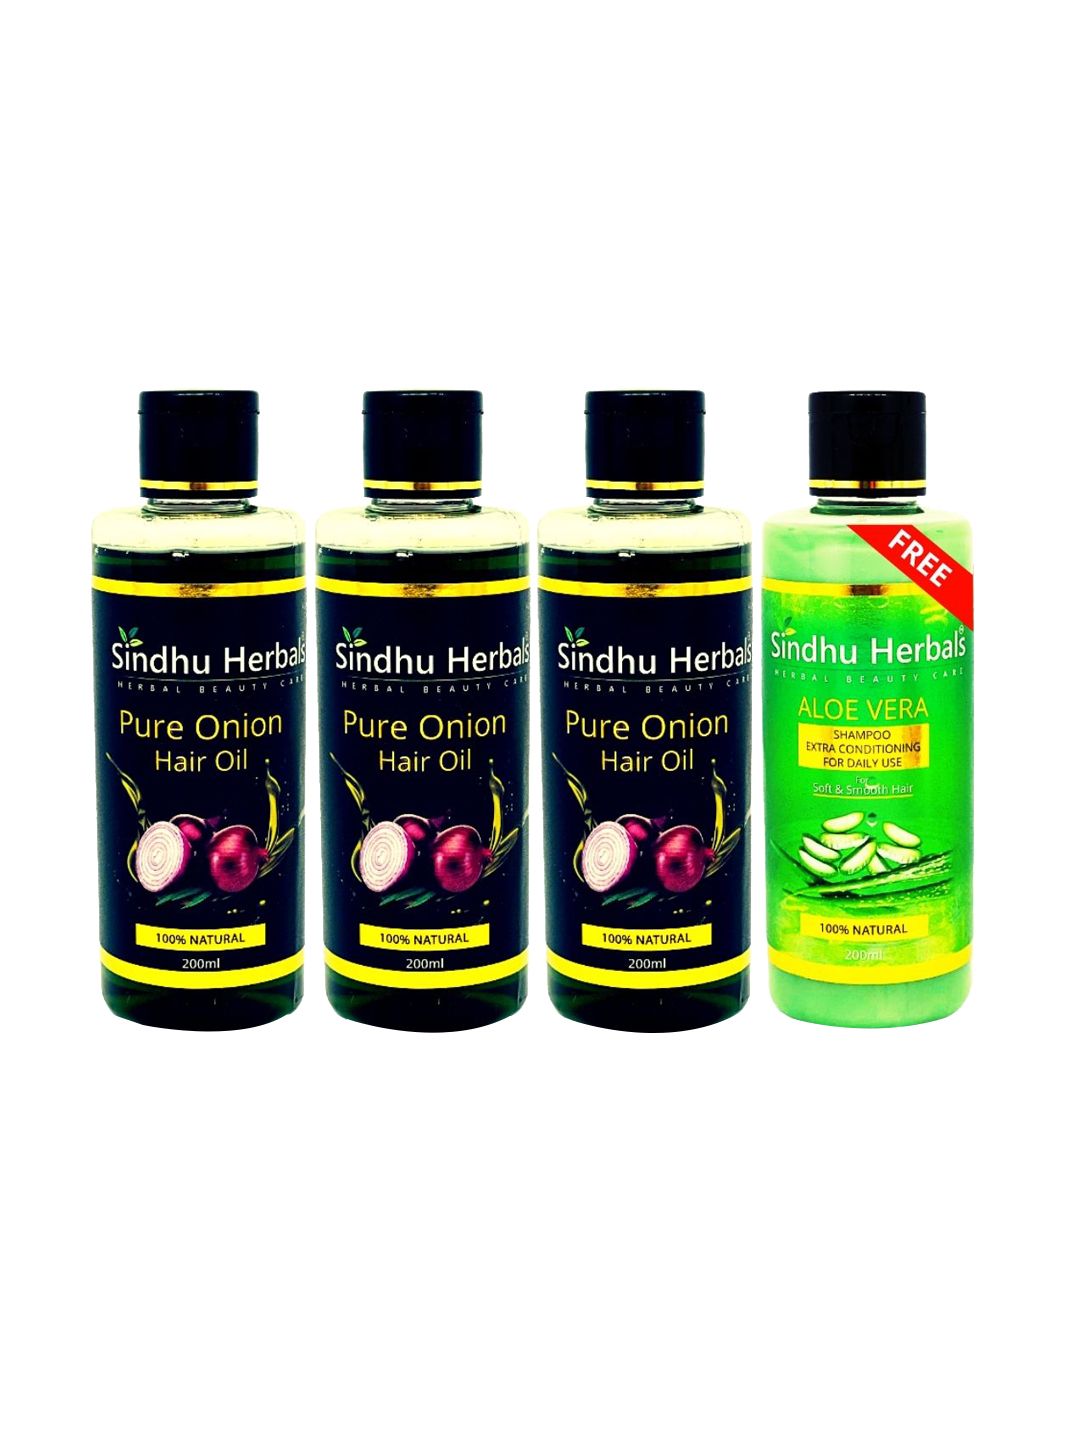 Sindhu Herbals Set of 3 Pure Onion Hair Oils with Free Aloe Vera Shampoo - 200ml each Price in India